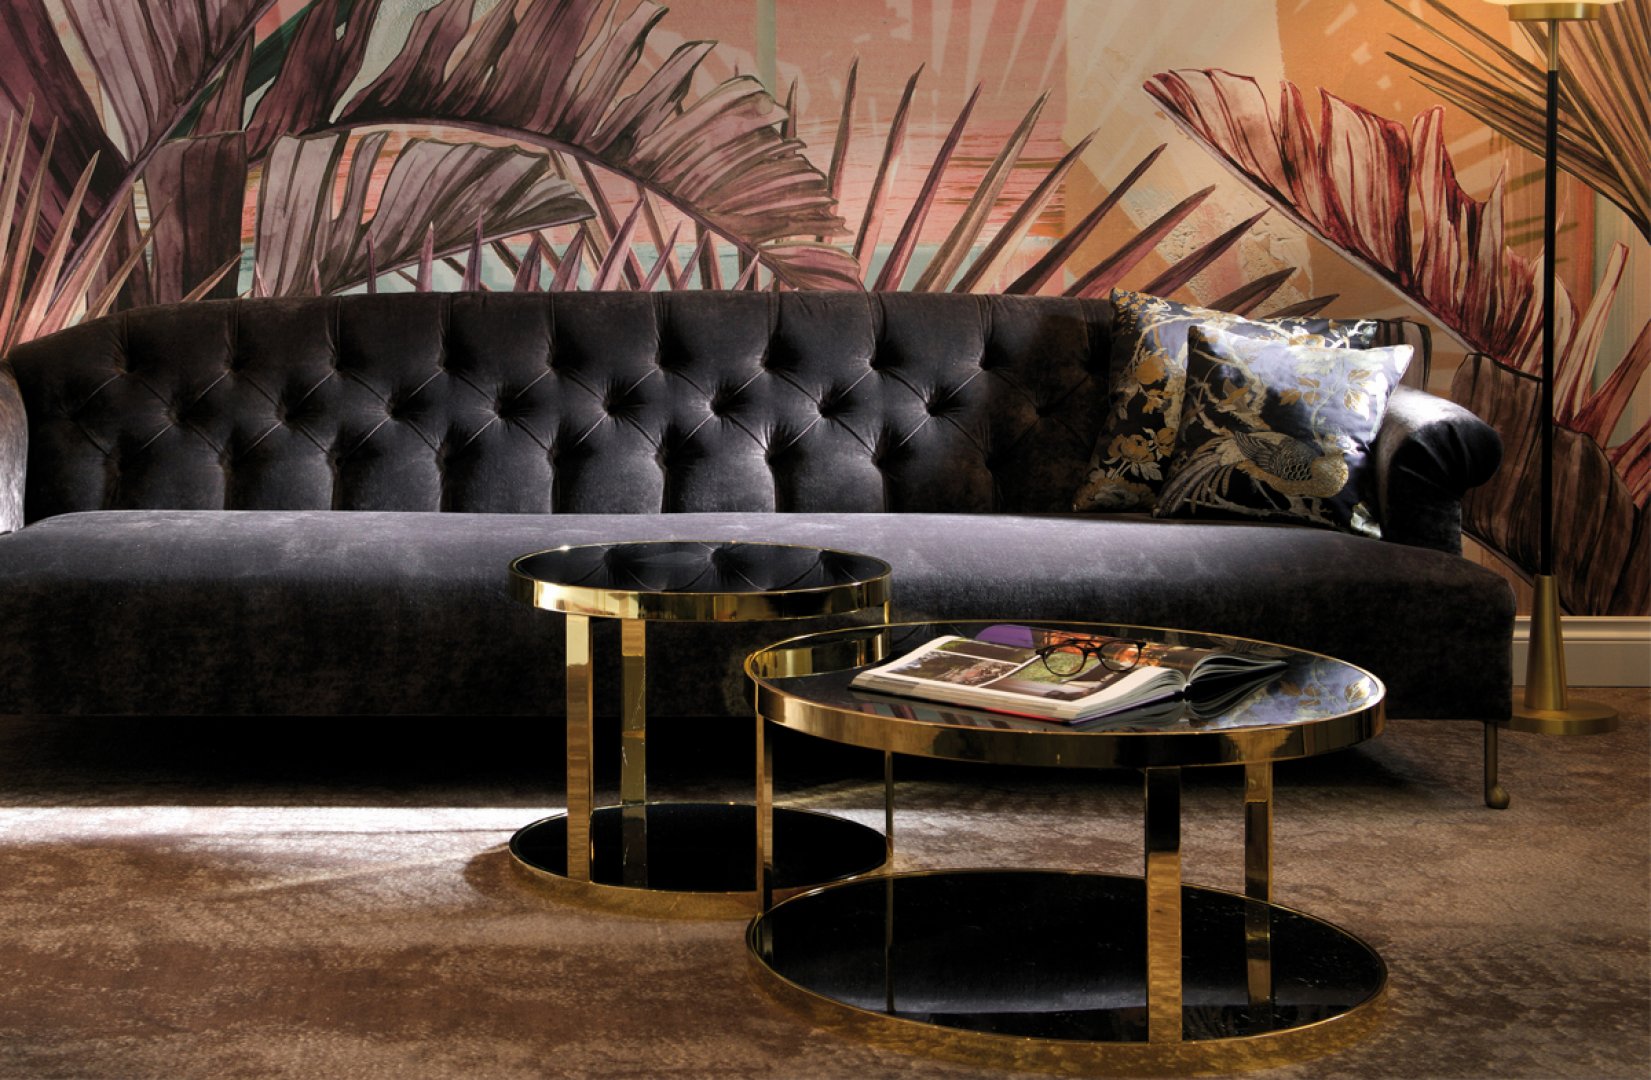 Goldies Coffee Table | مفروشات ايلانو لاكشري - ماسكو - مودوكو